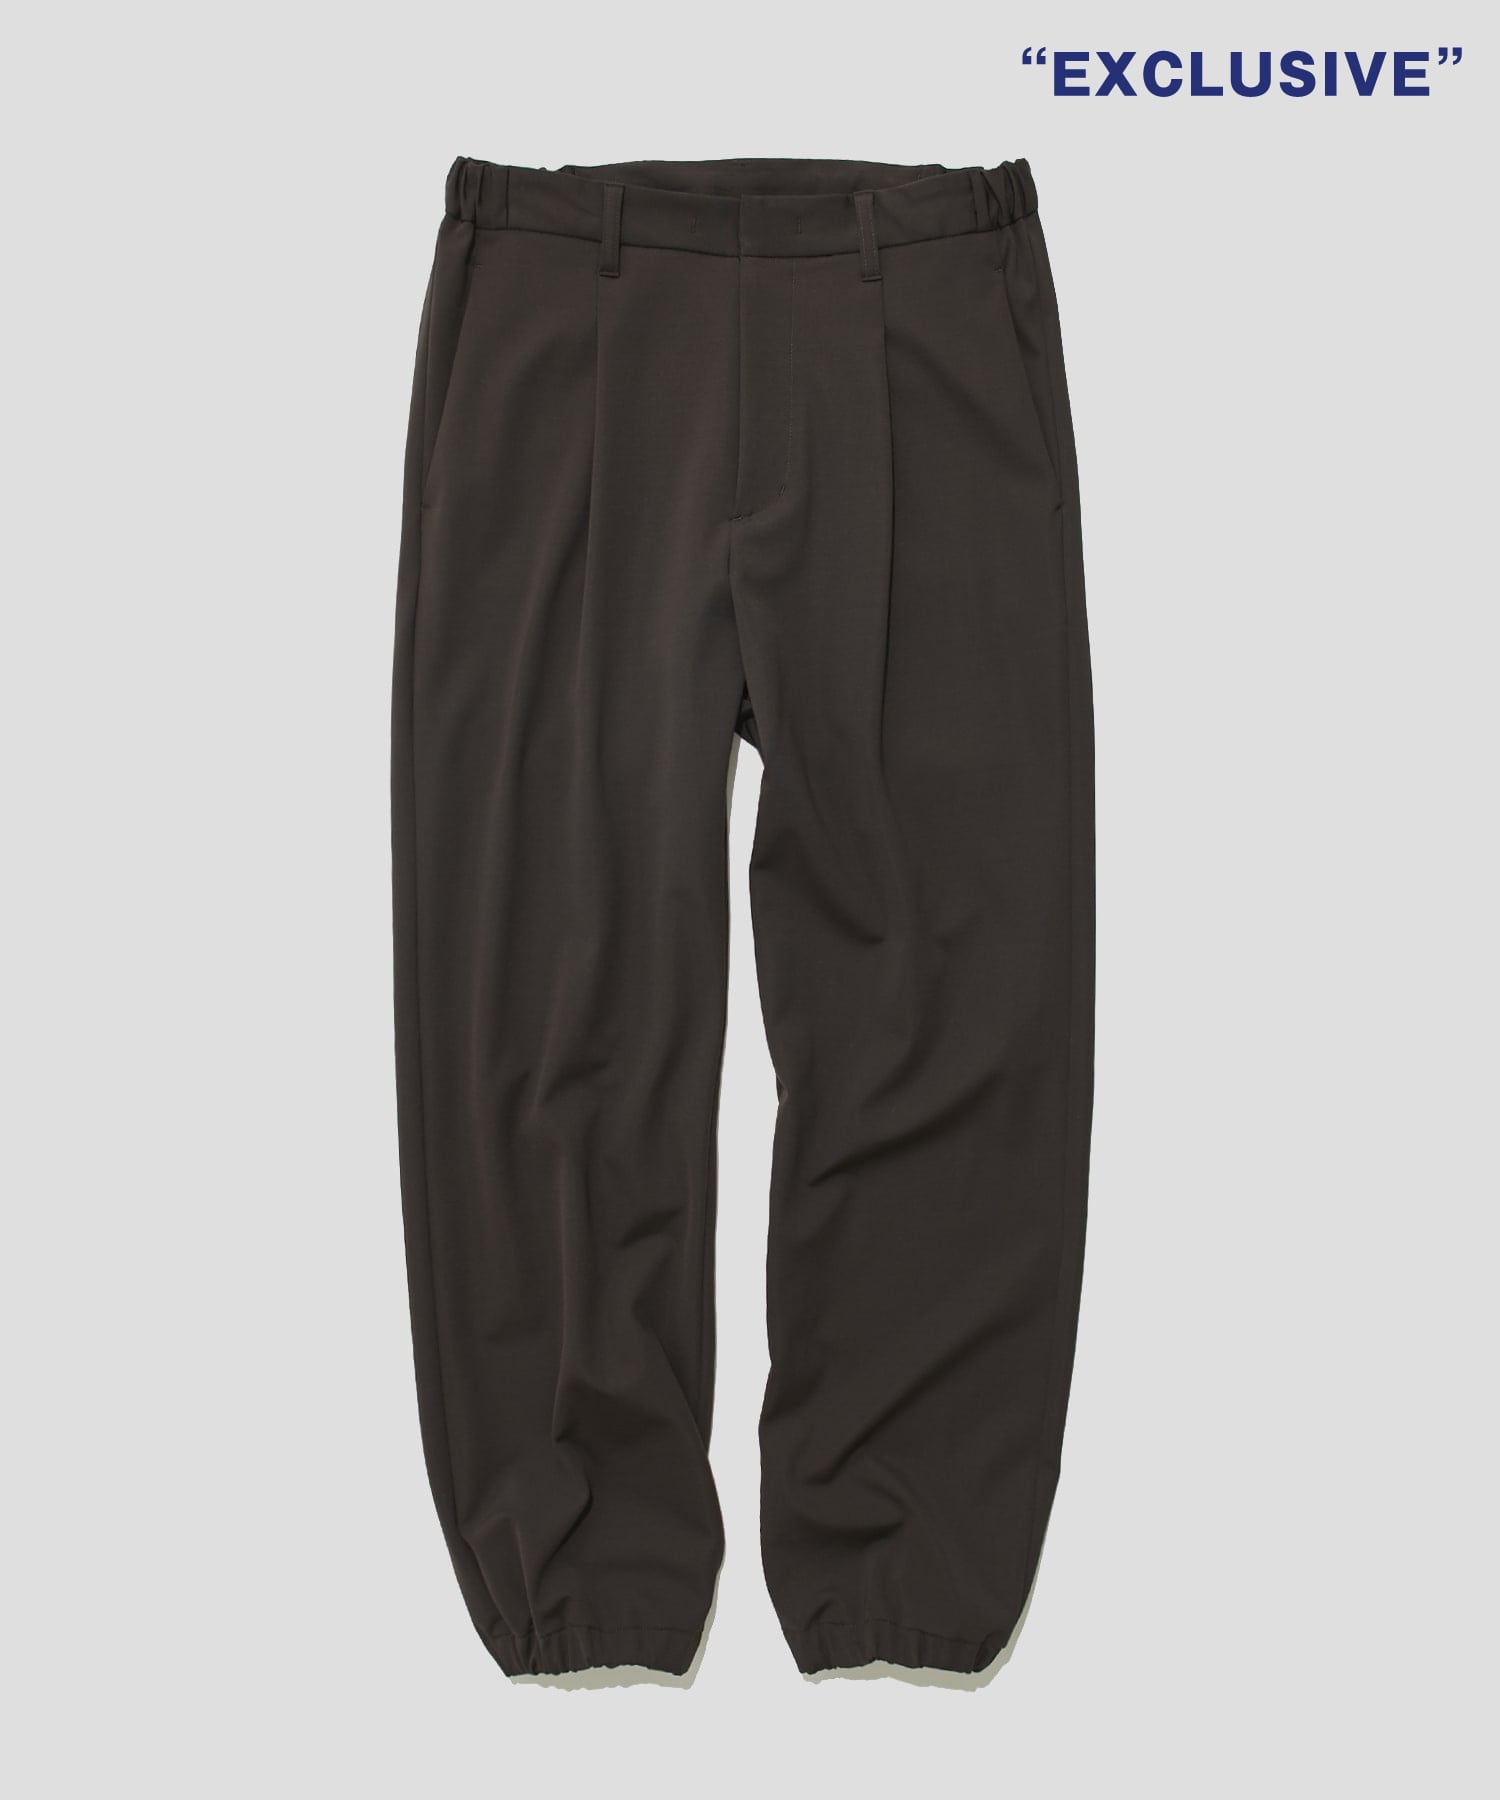 Washable High Function Jersey Easy Pants(44 DARK BROWN): THE TOKYO